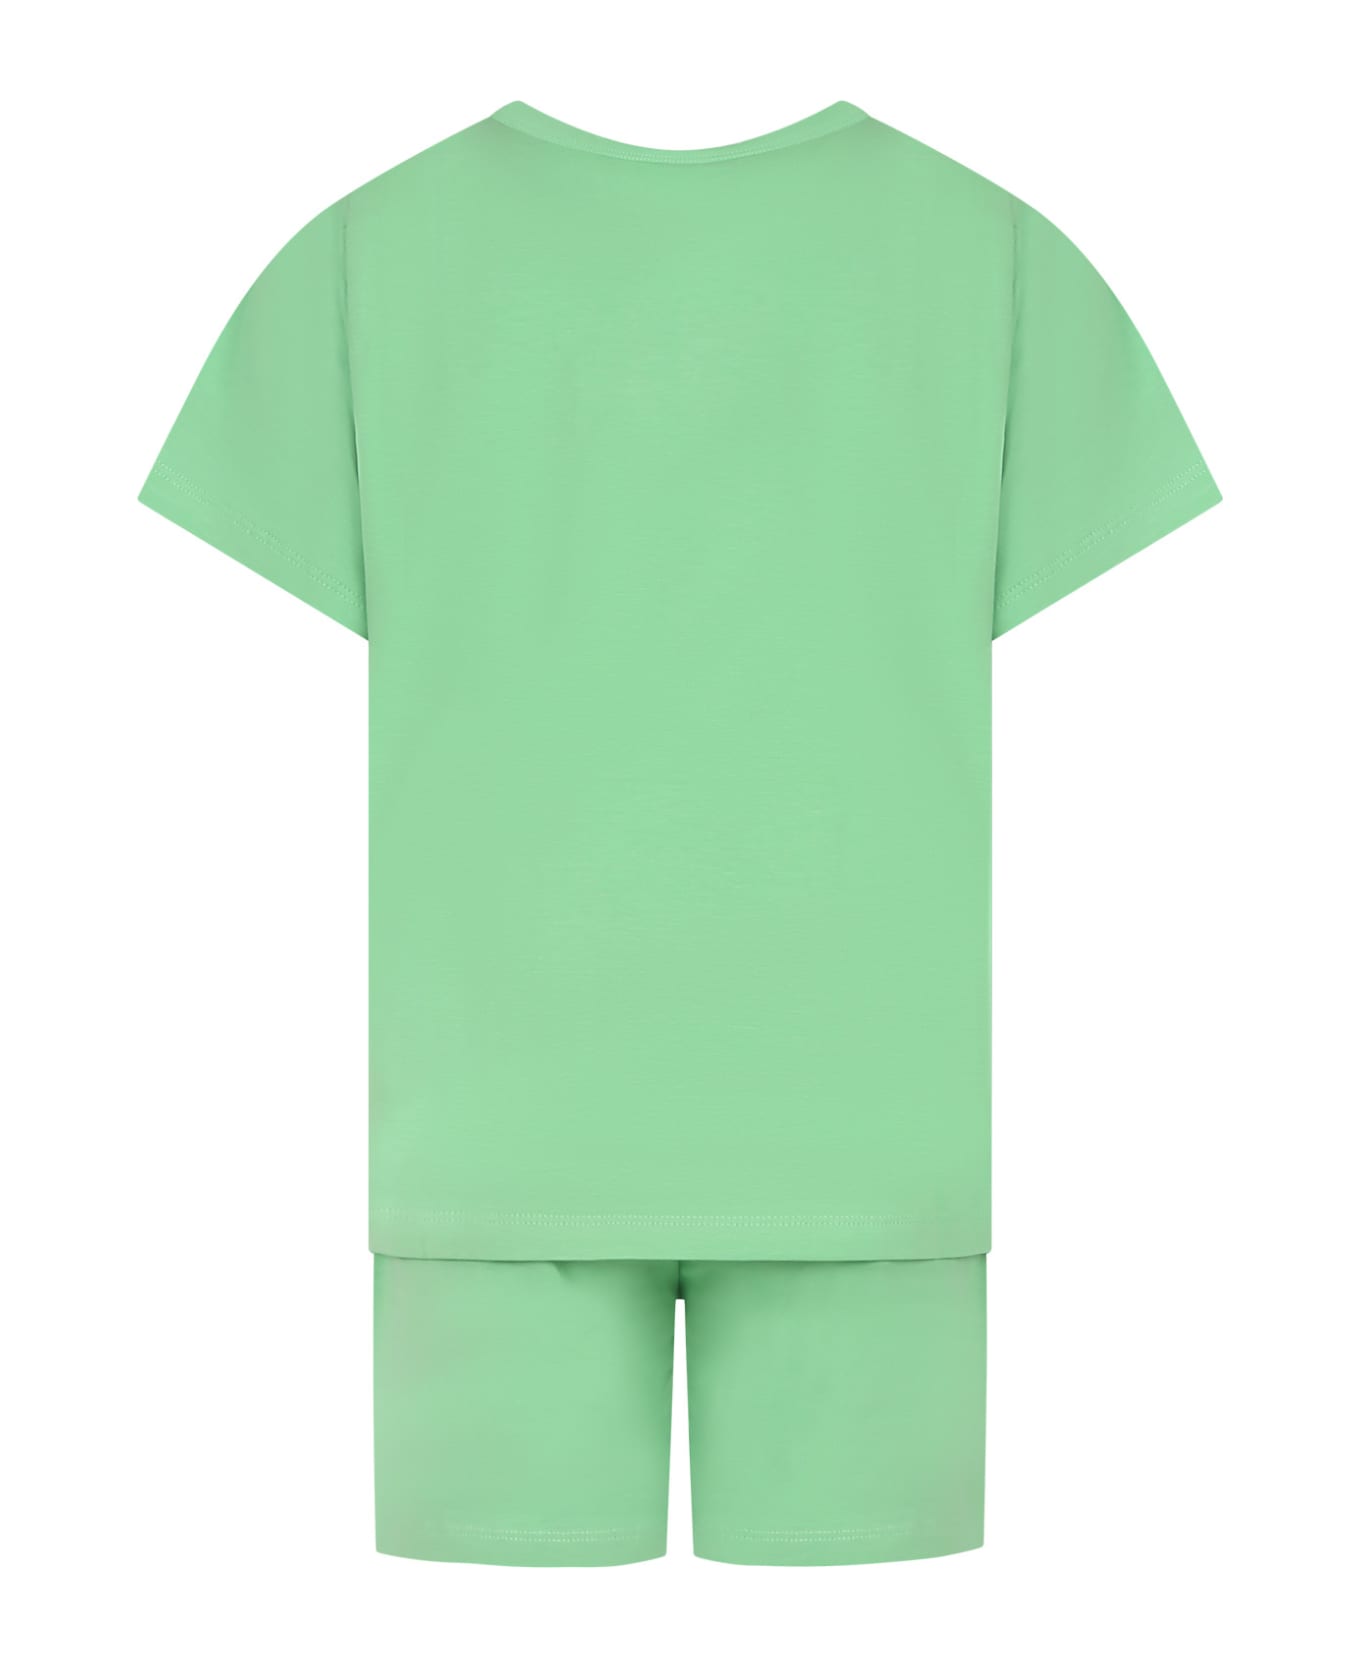 Molo Green Pajamas For Kids With Smile - Green